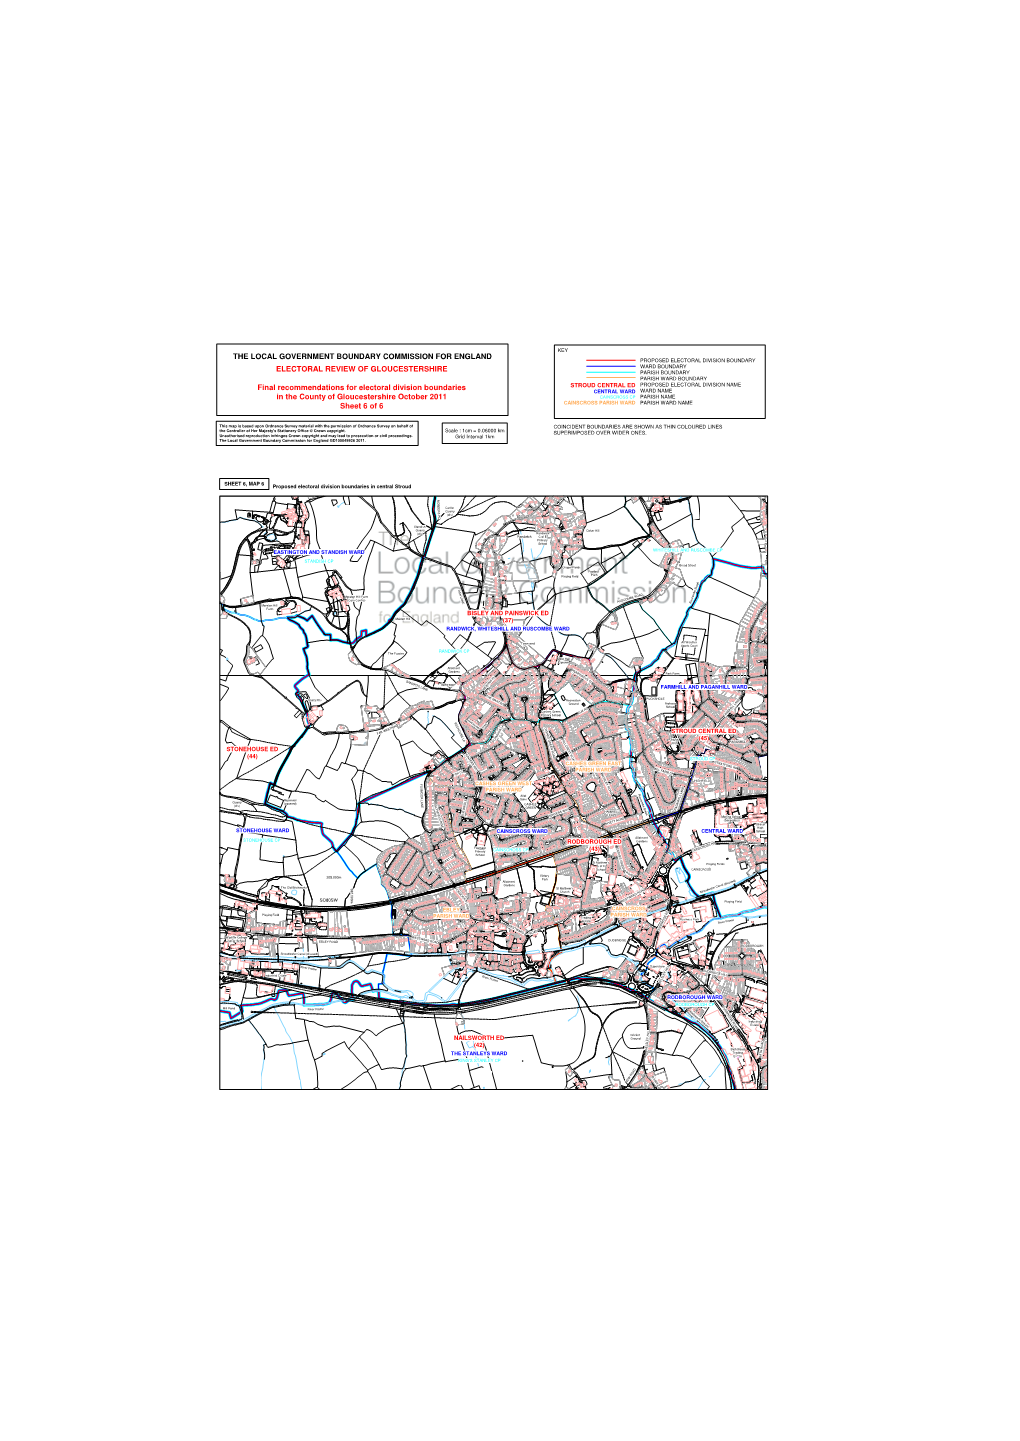 THE LOCAL GOVERNMENT BOUNDARY COMMISSION for ENGLAND ELECTORAL REVIEW of GLOUCESTERSHIRE Final Recommendations for Electoral